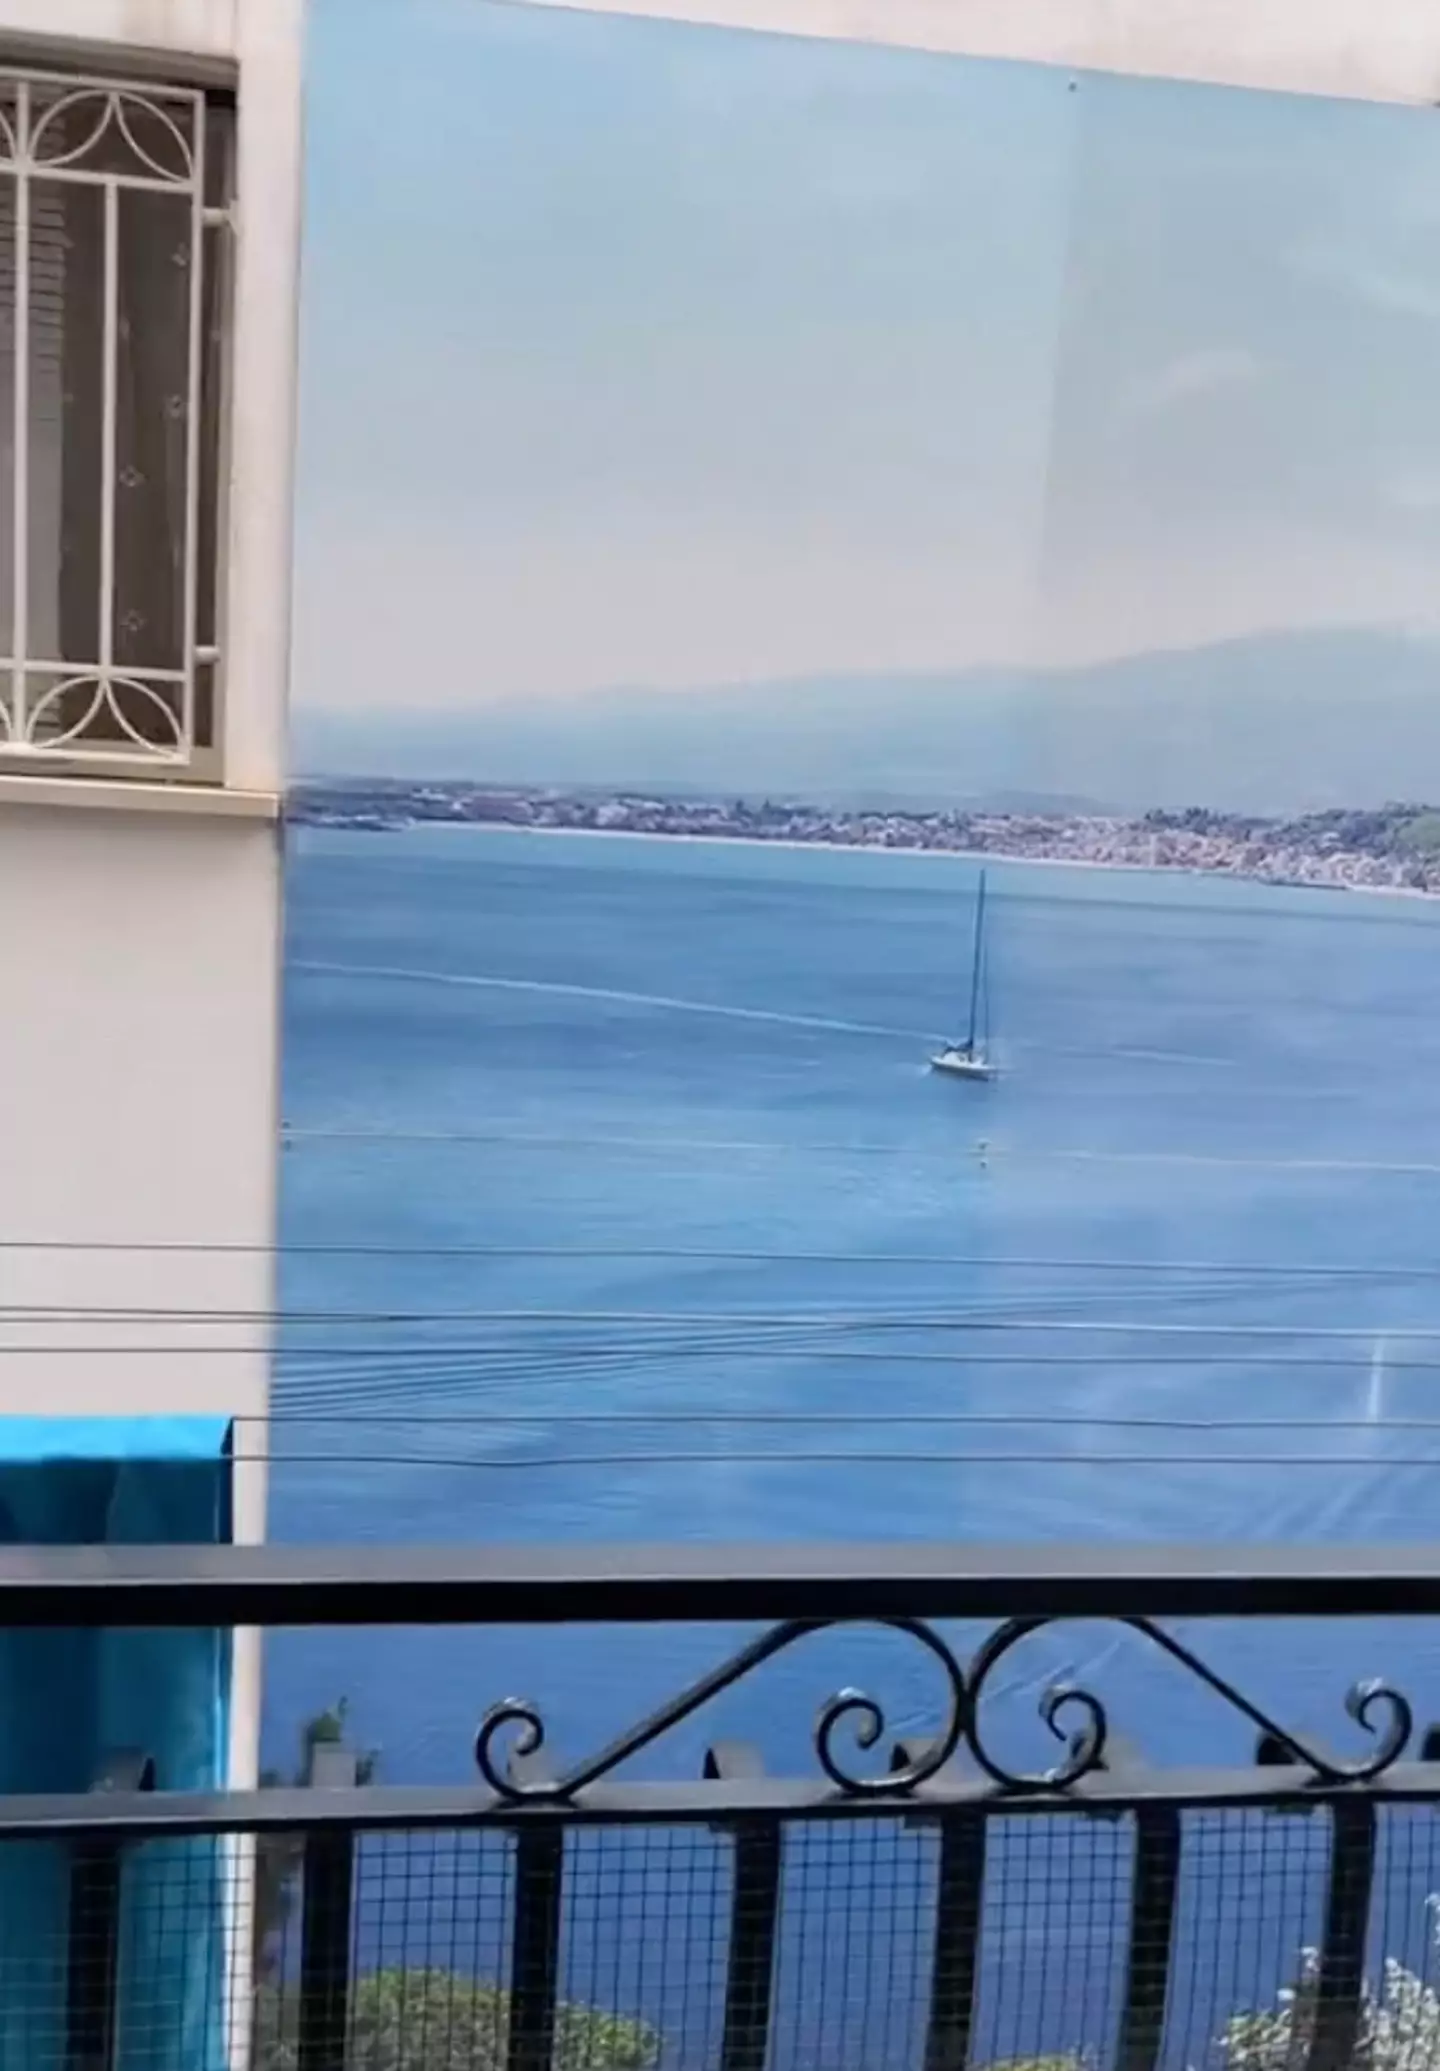 The so-called sea view is actually a picture slapped on a grubby wall (@clarisamurgia/Newsflash)